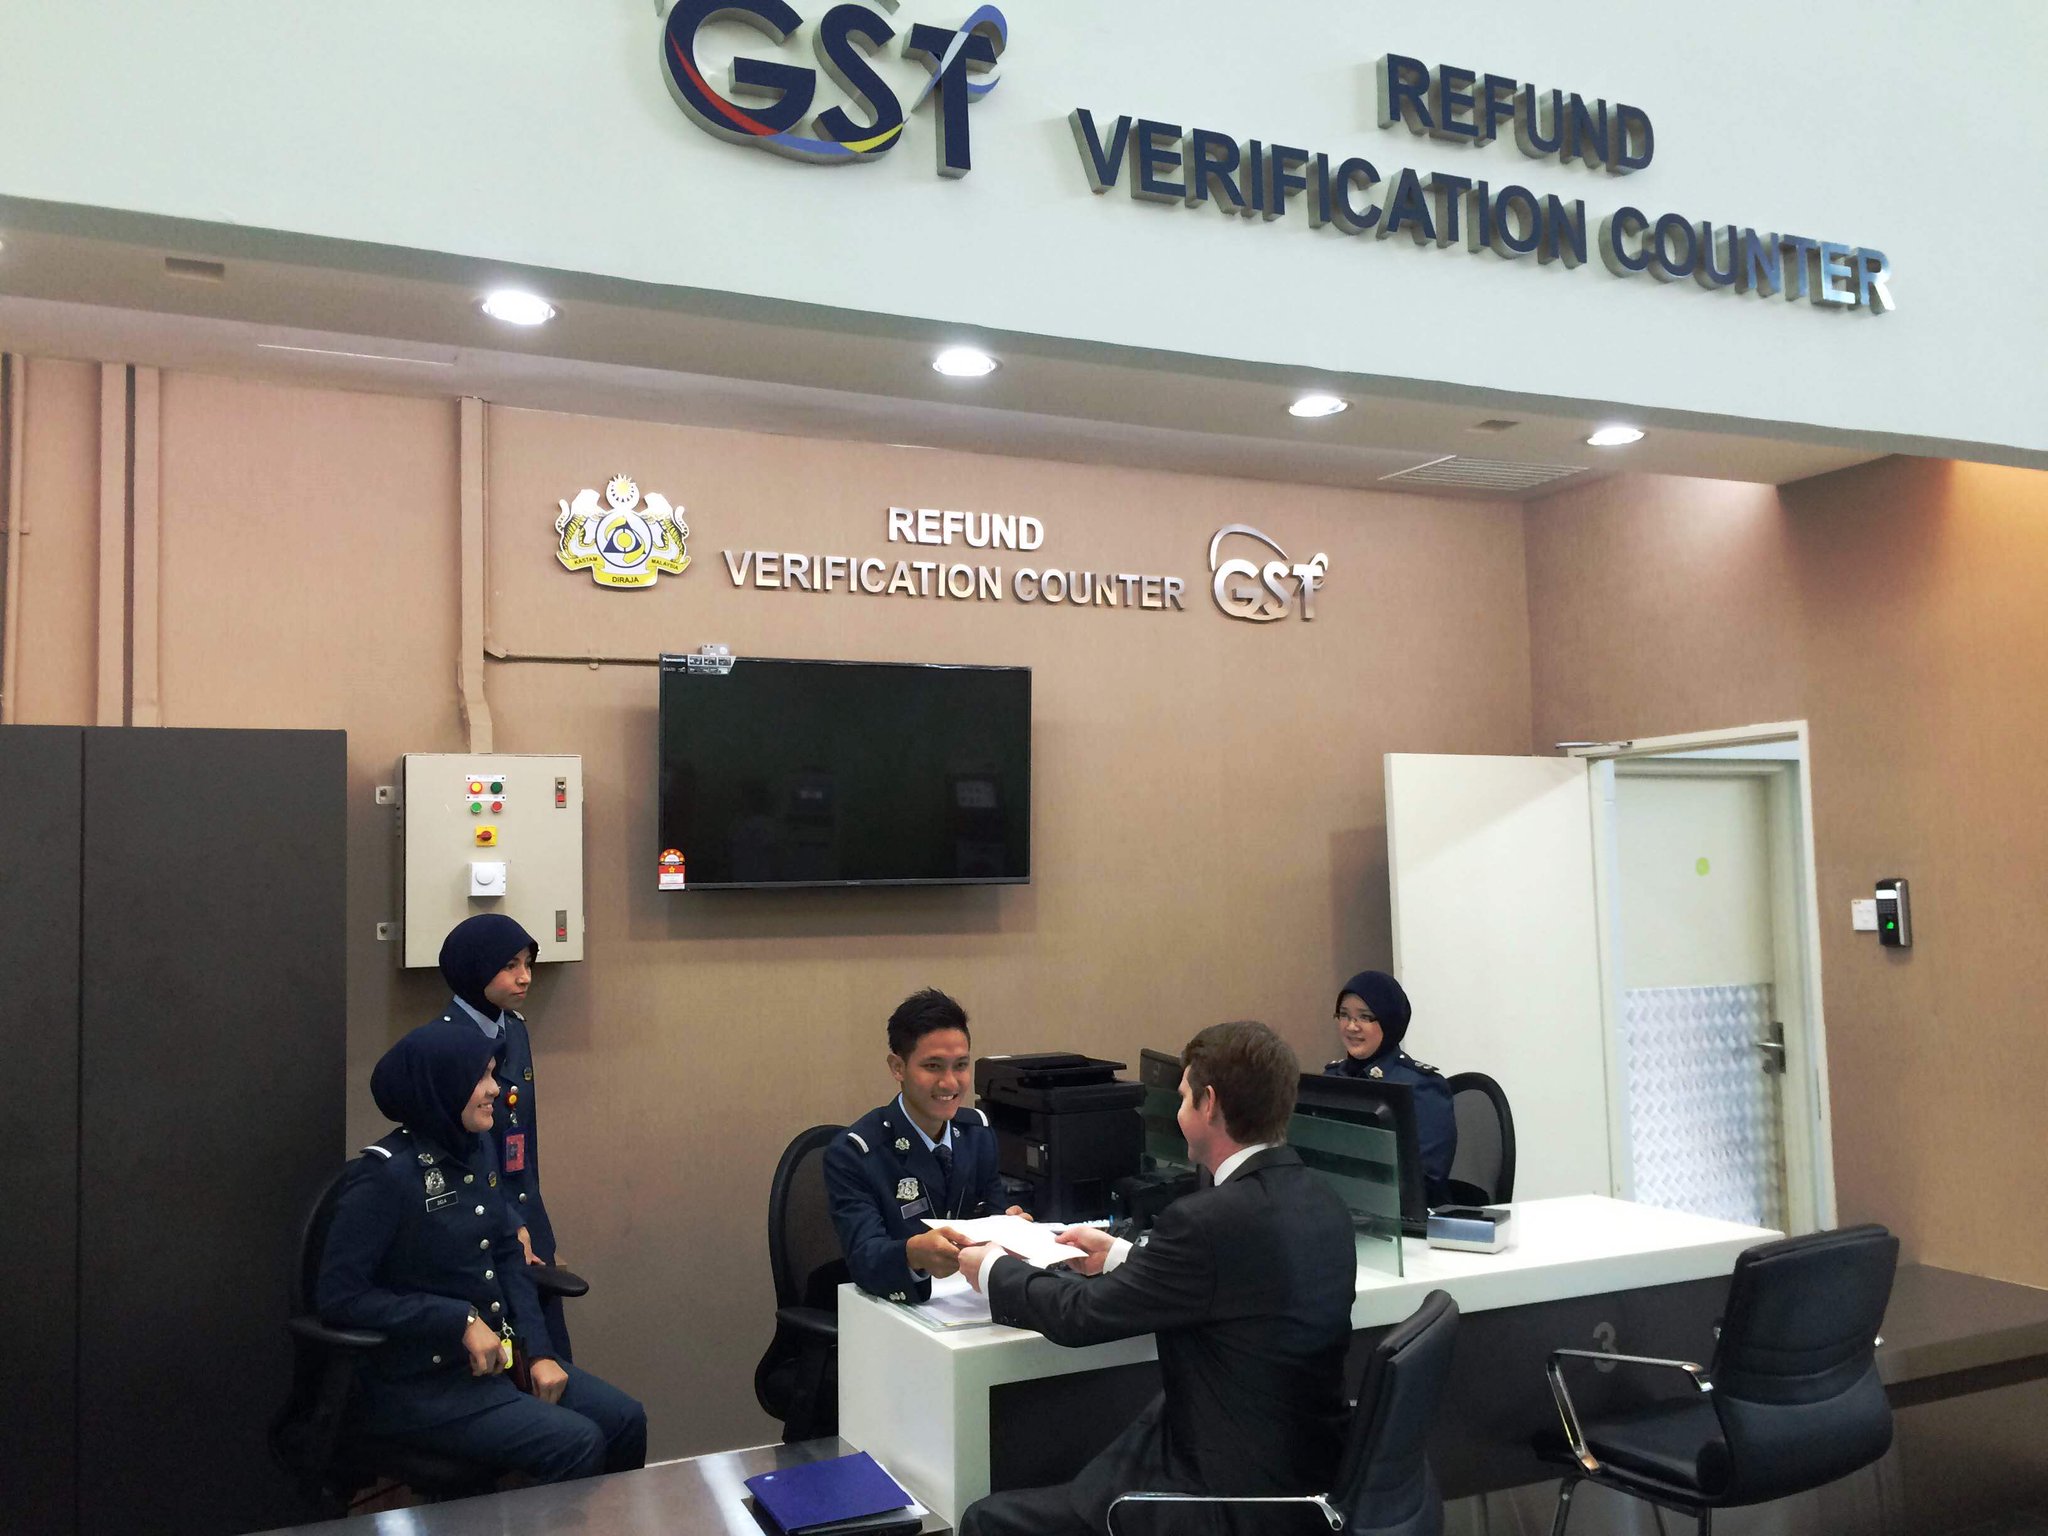 malaysia-airports-on-twitter-gst-refund-verification-counter-at